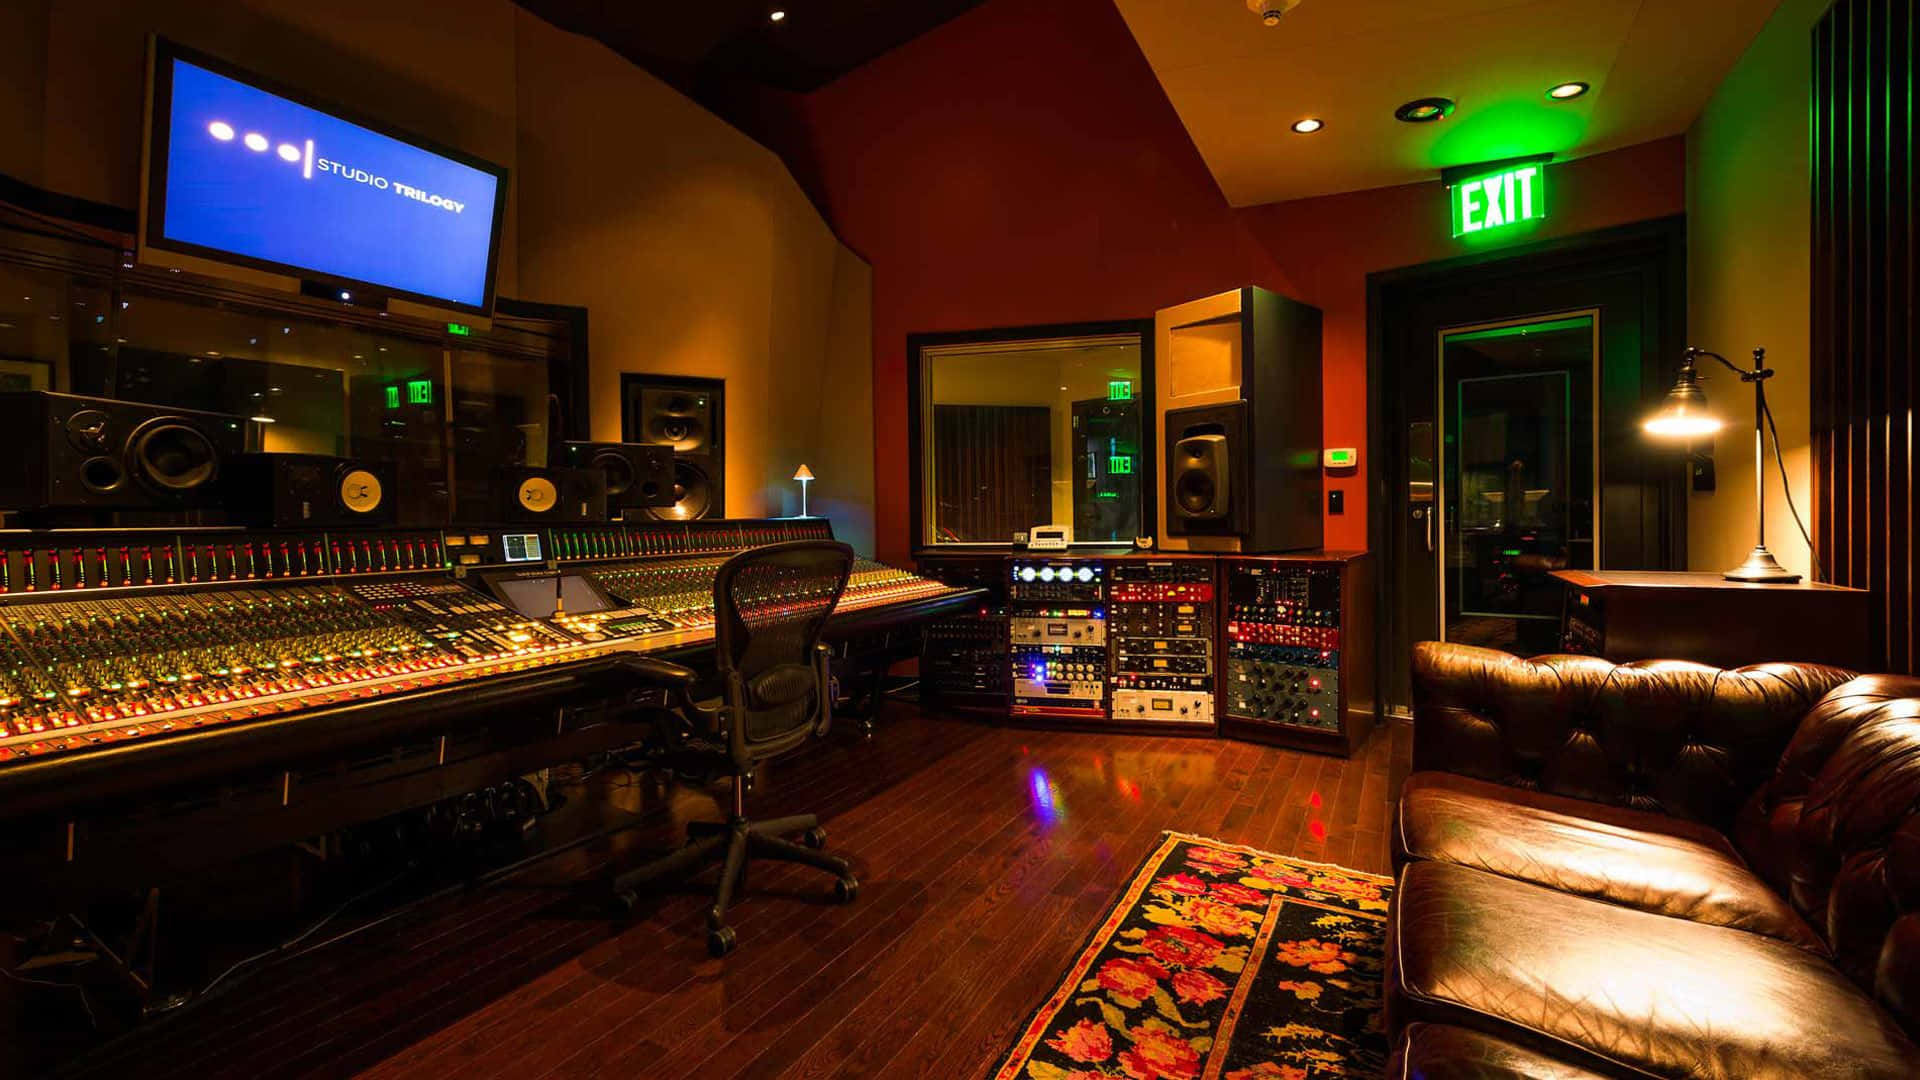 Create high-quality music with a professional music studio